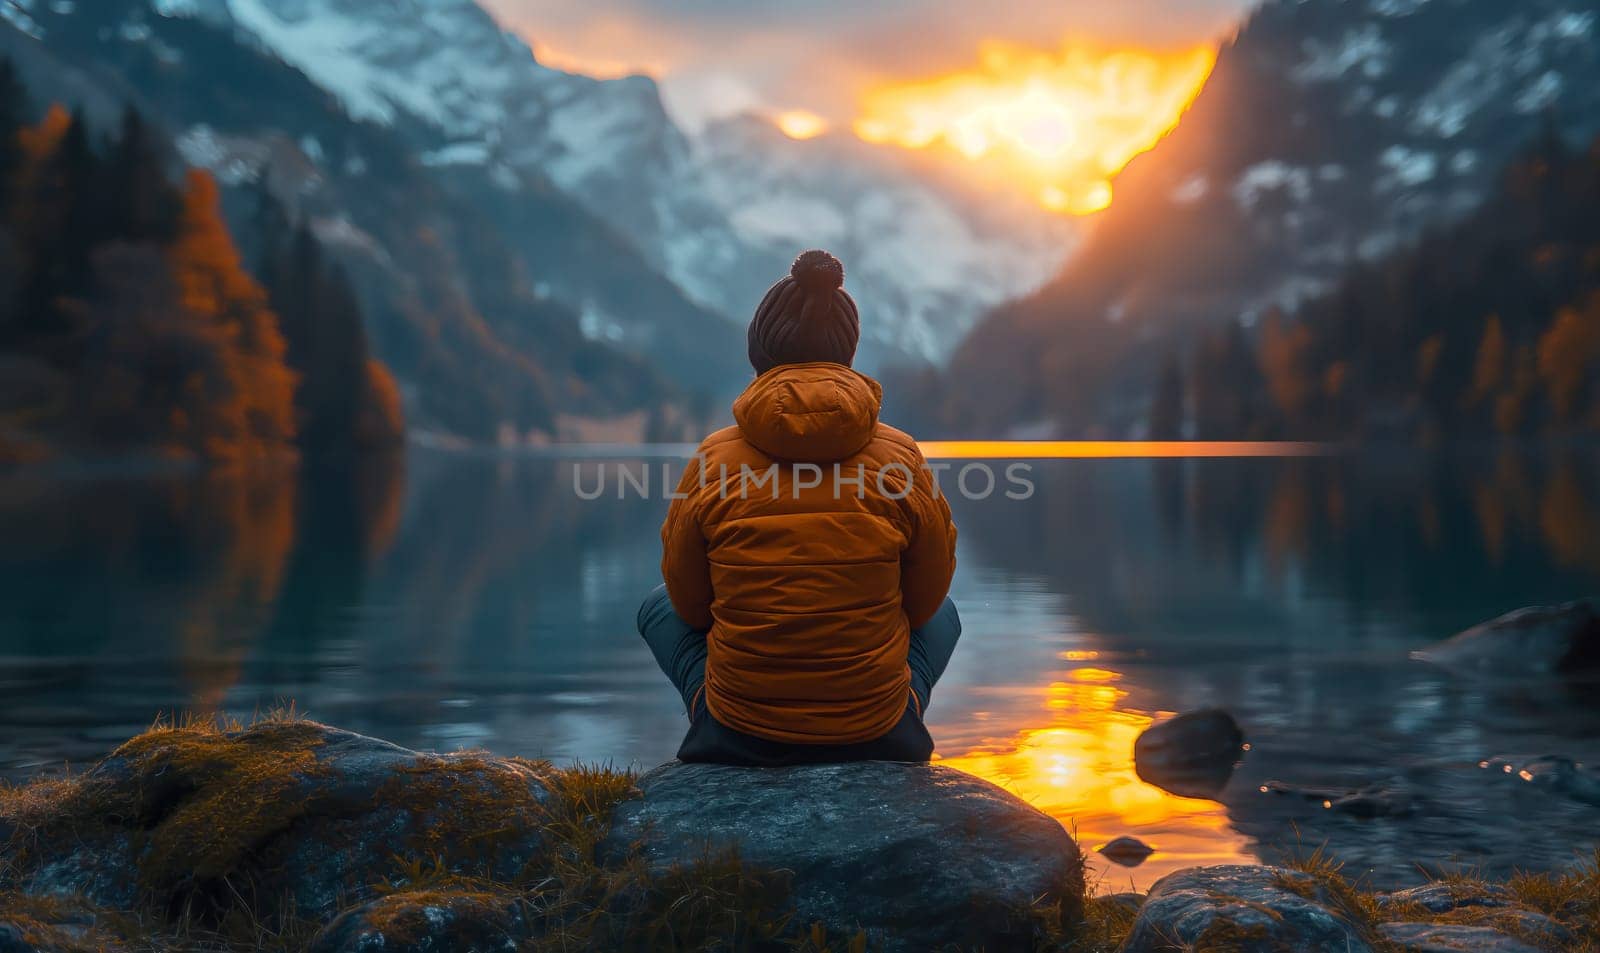 Person Sitting on Rock Looking at Lake by Fischeron